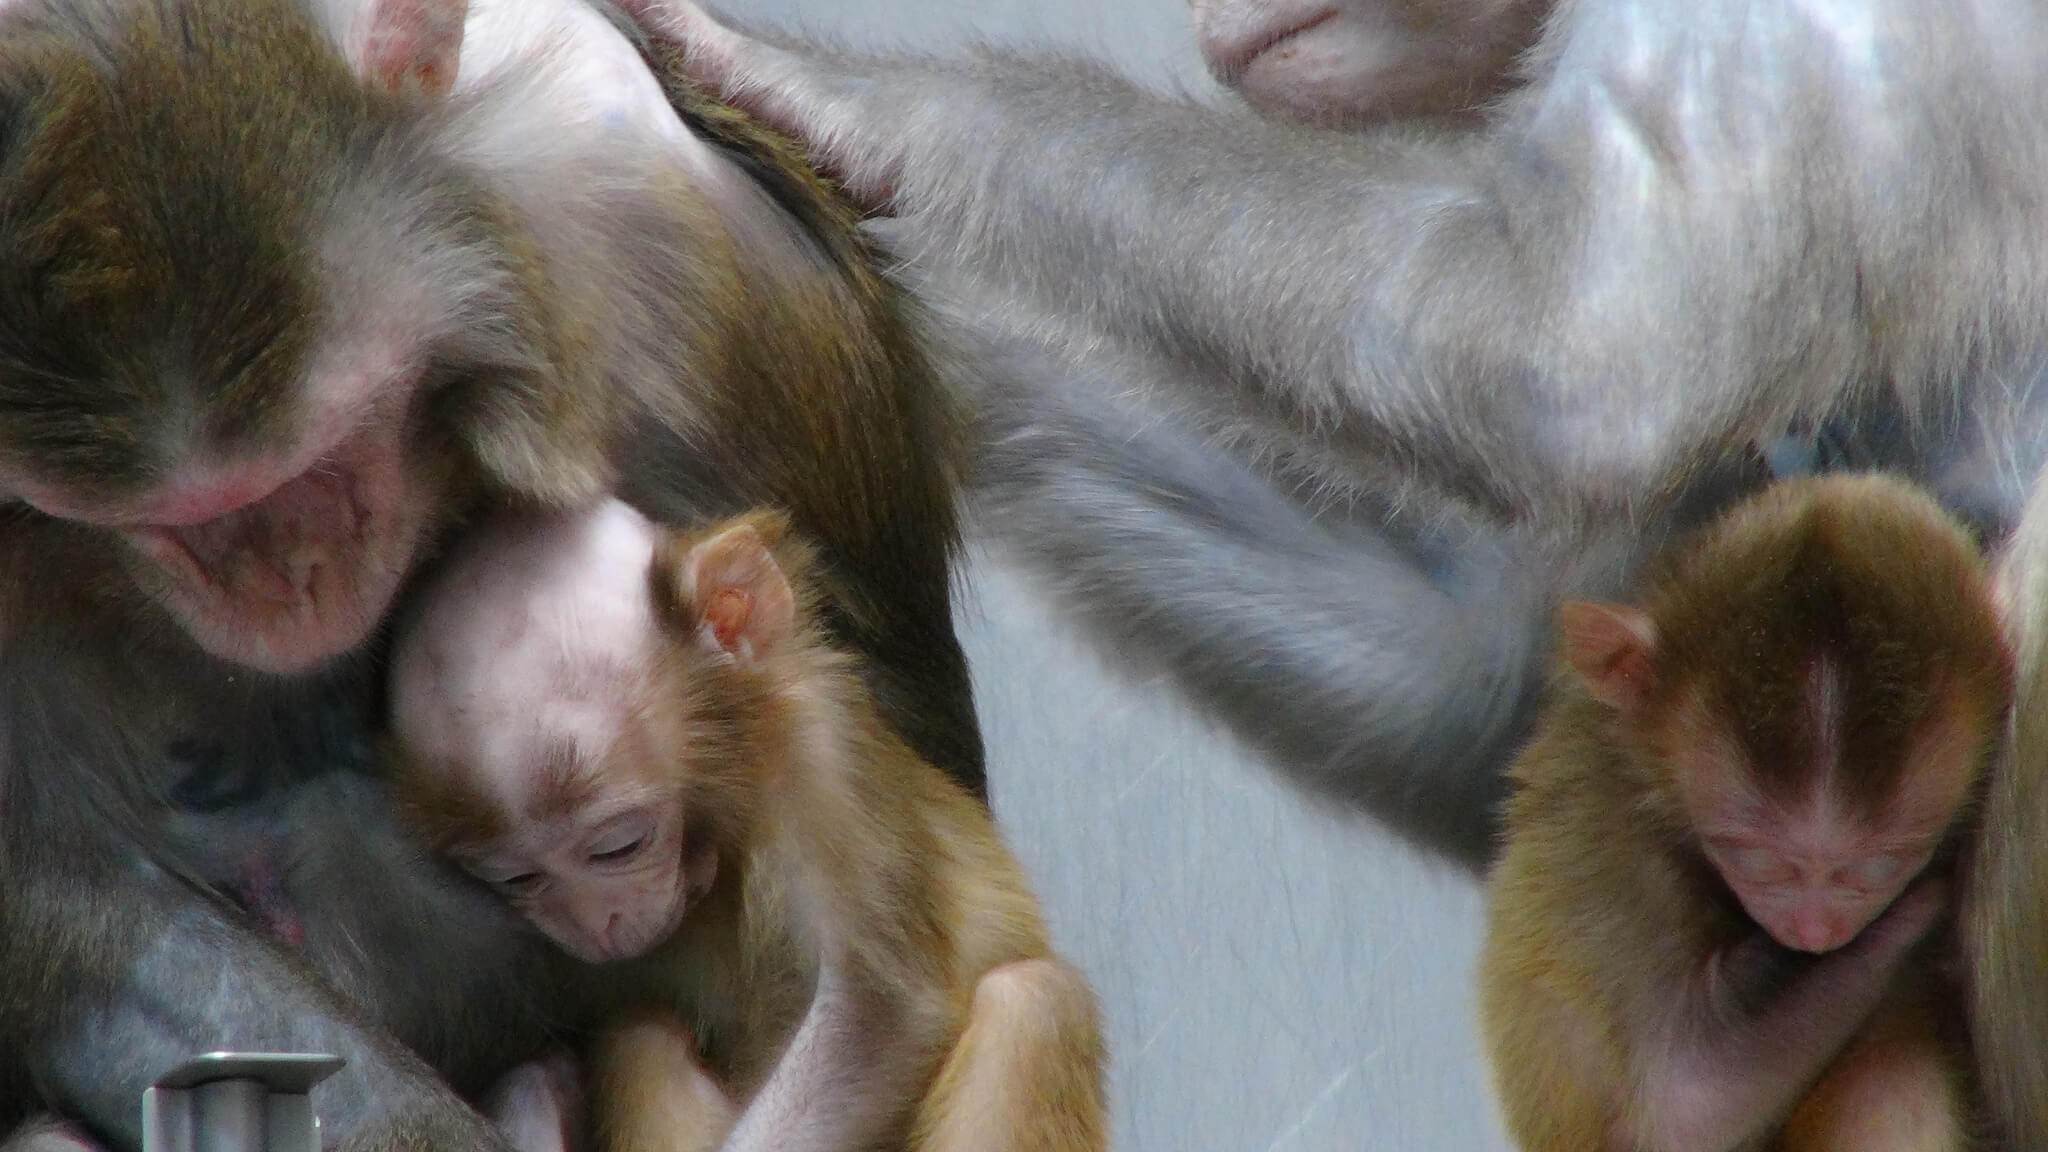 the baby monkey experiment